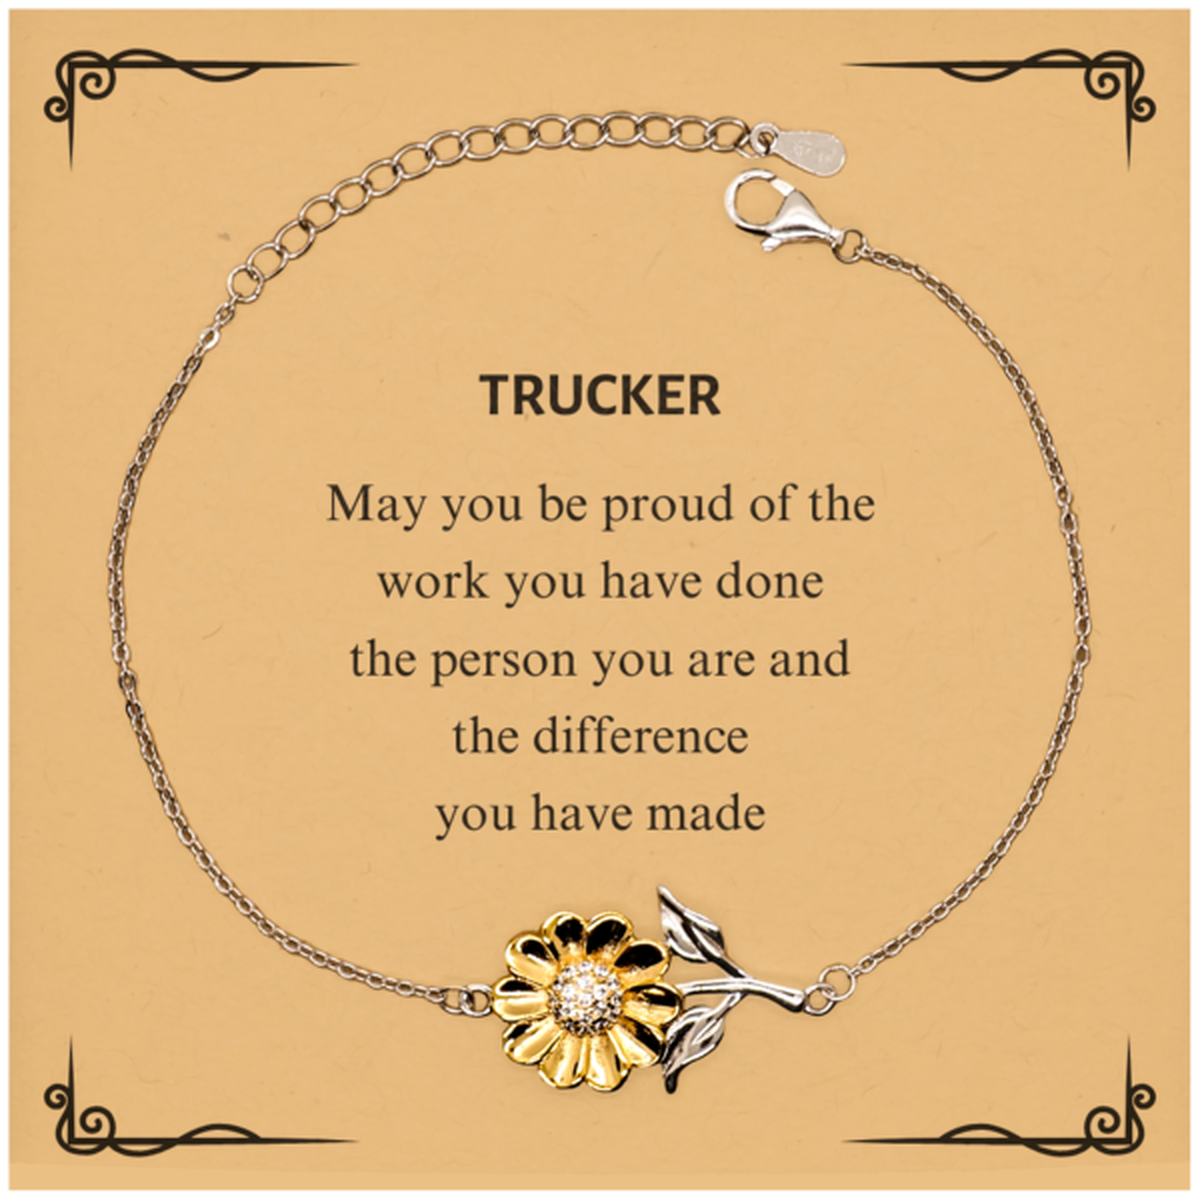 Trucker May you be proud of the work you have done, Retirement Trucker Sunflower Bracelet for Colleague Appreciation Gifts Amazing for Trucker